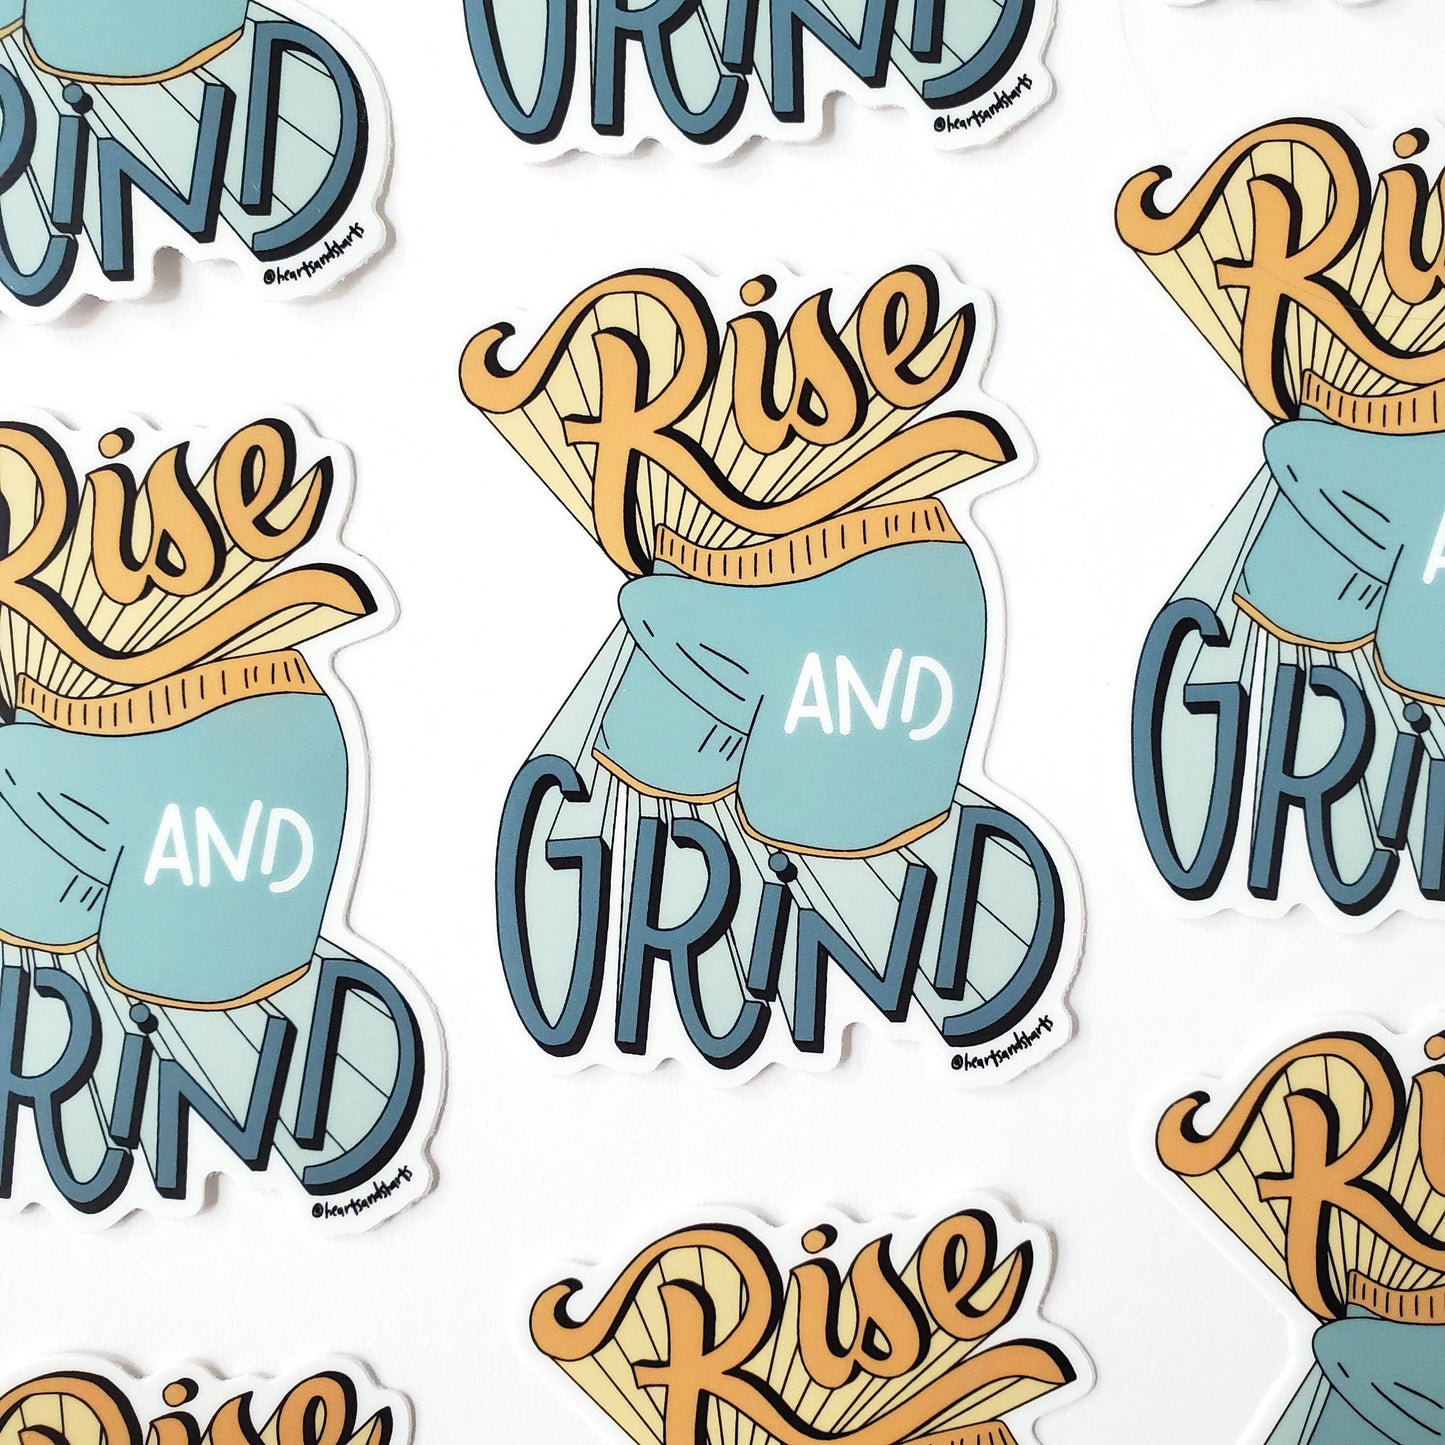 RISE AND GRIND STICKER